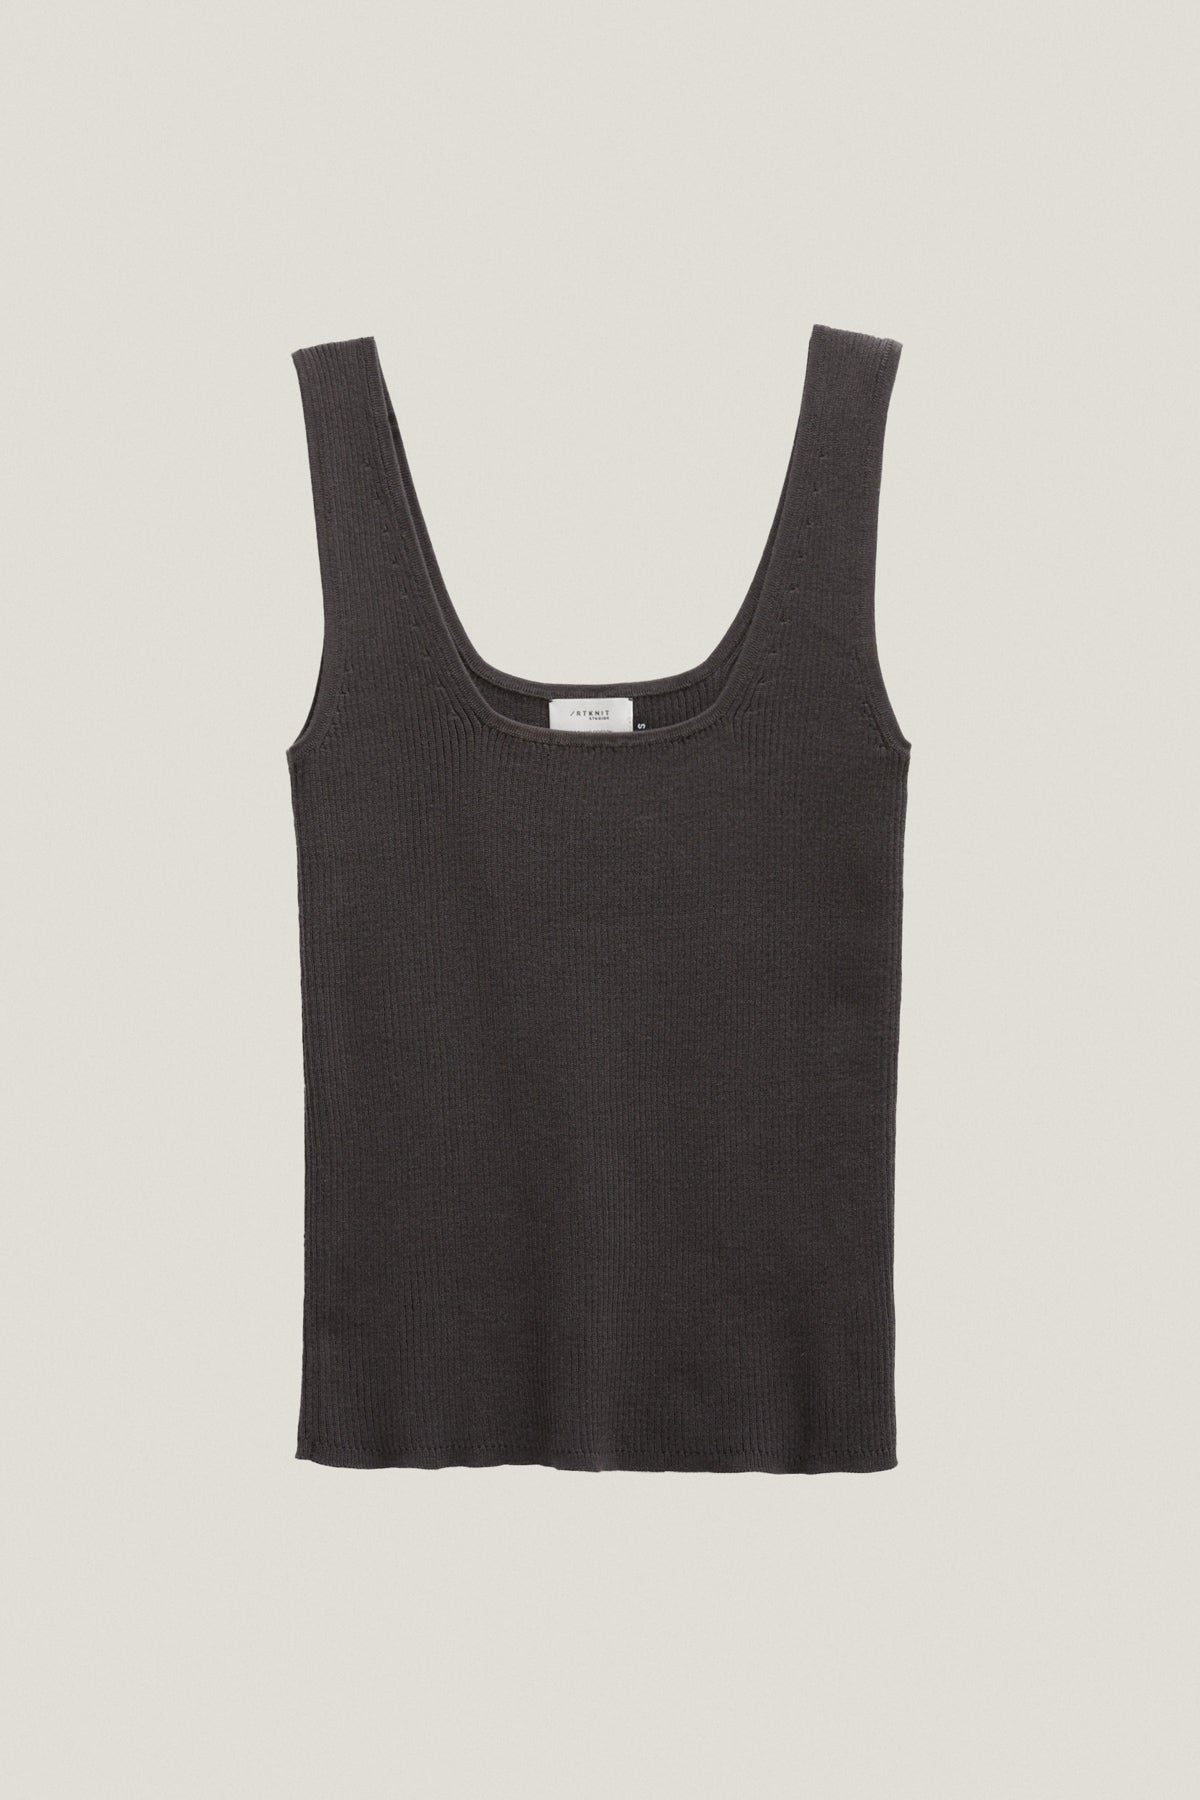 the organic cotton ribbed tank top imperfect version 22 graphite